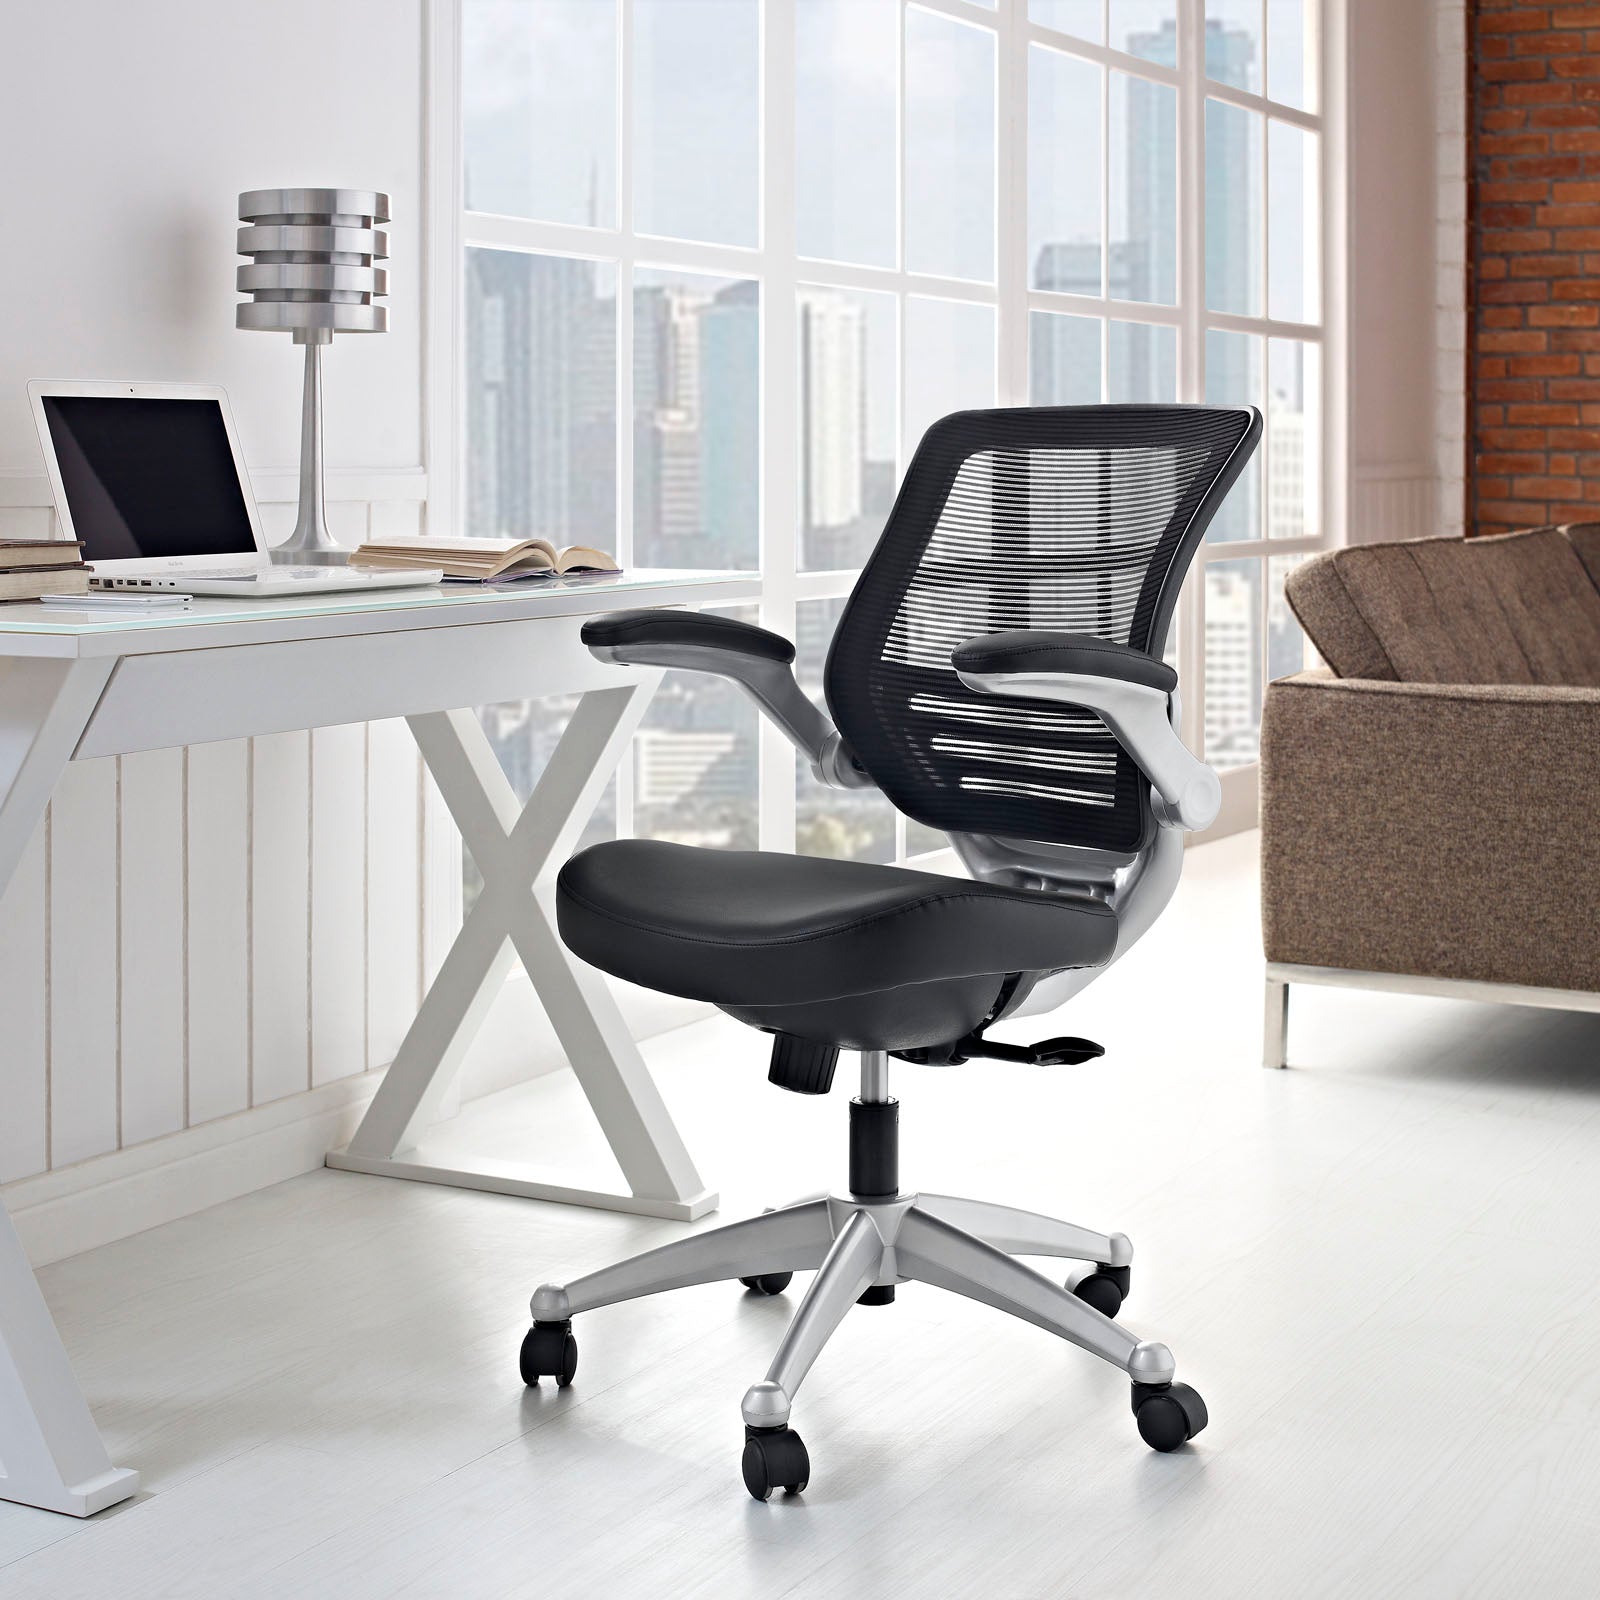 Edge Leather Office Chair - East Shore Modern Home Furnishings